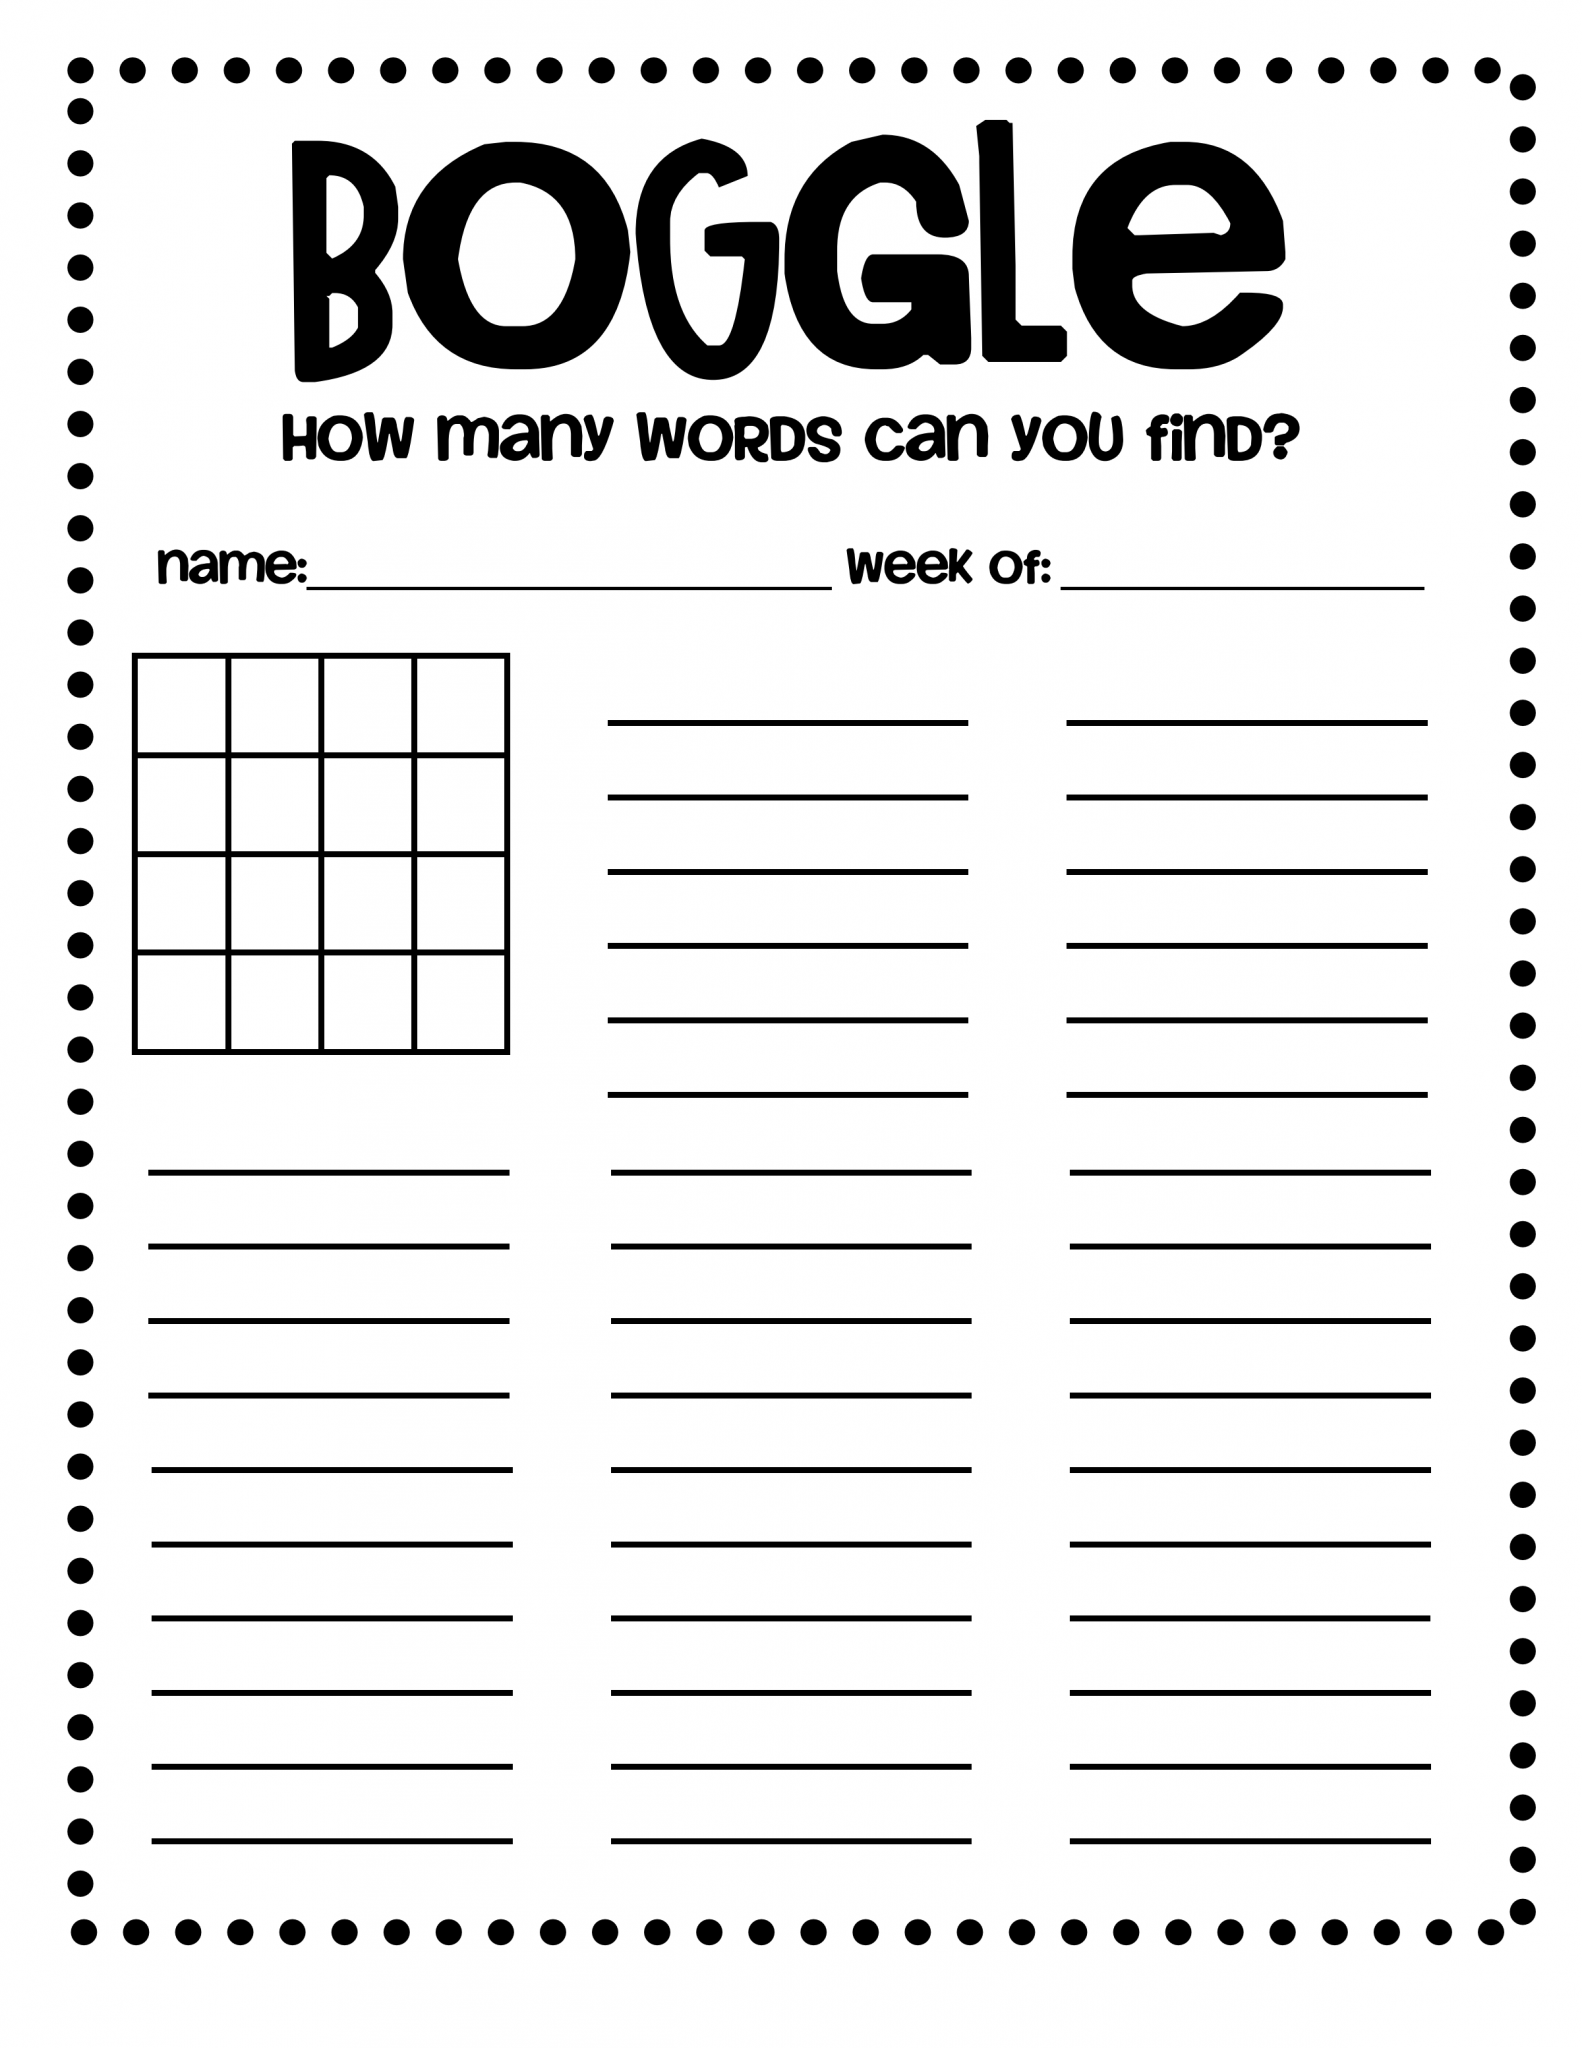 free-boggle-word-games-template-101-activity